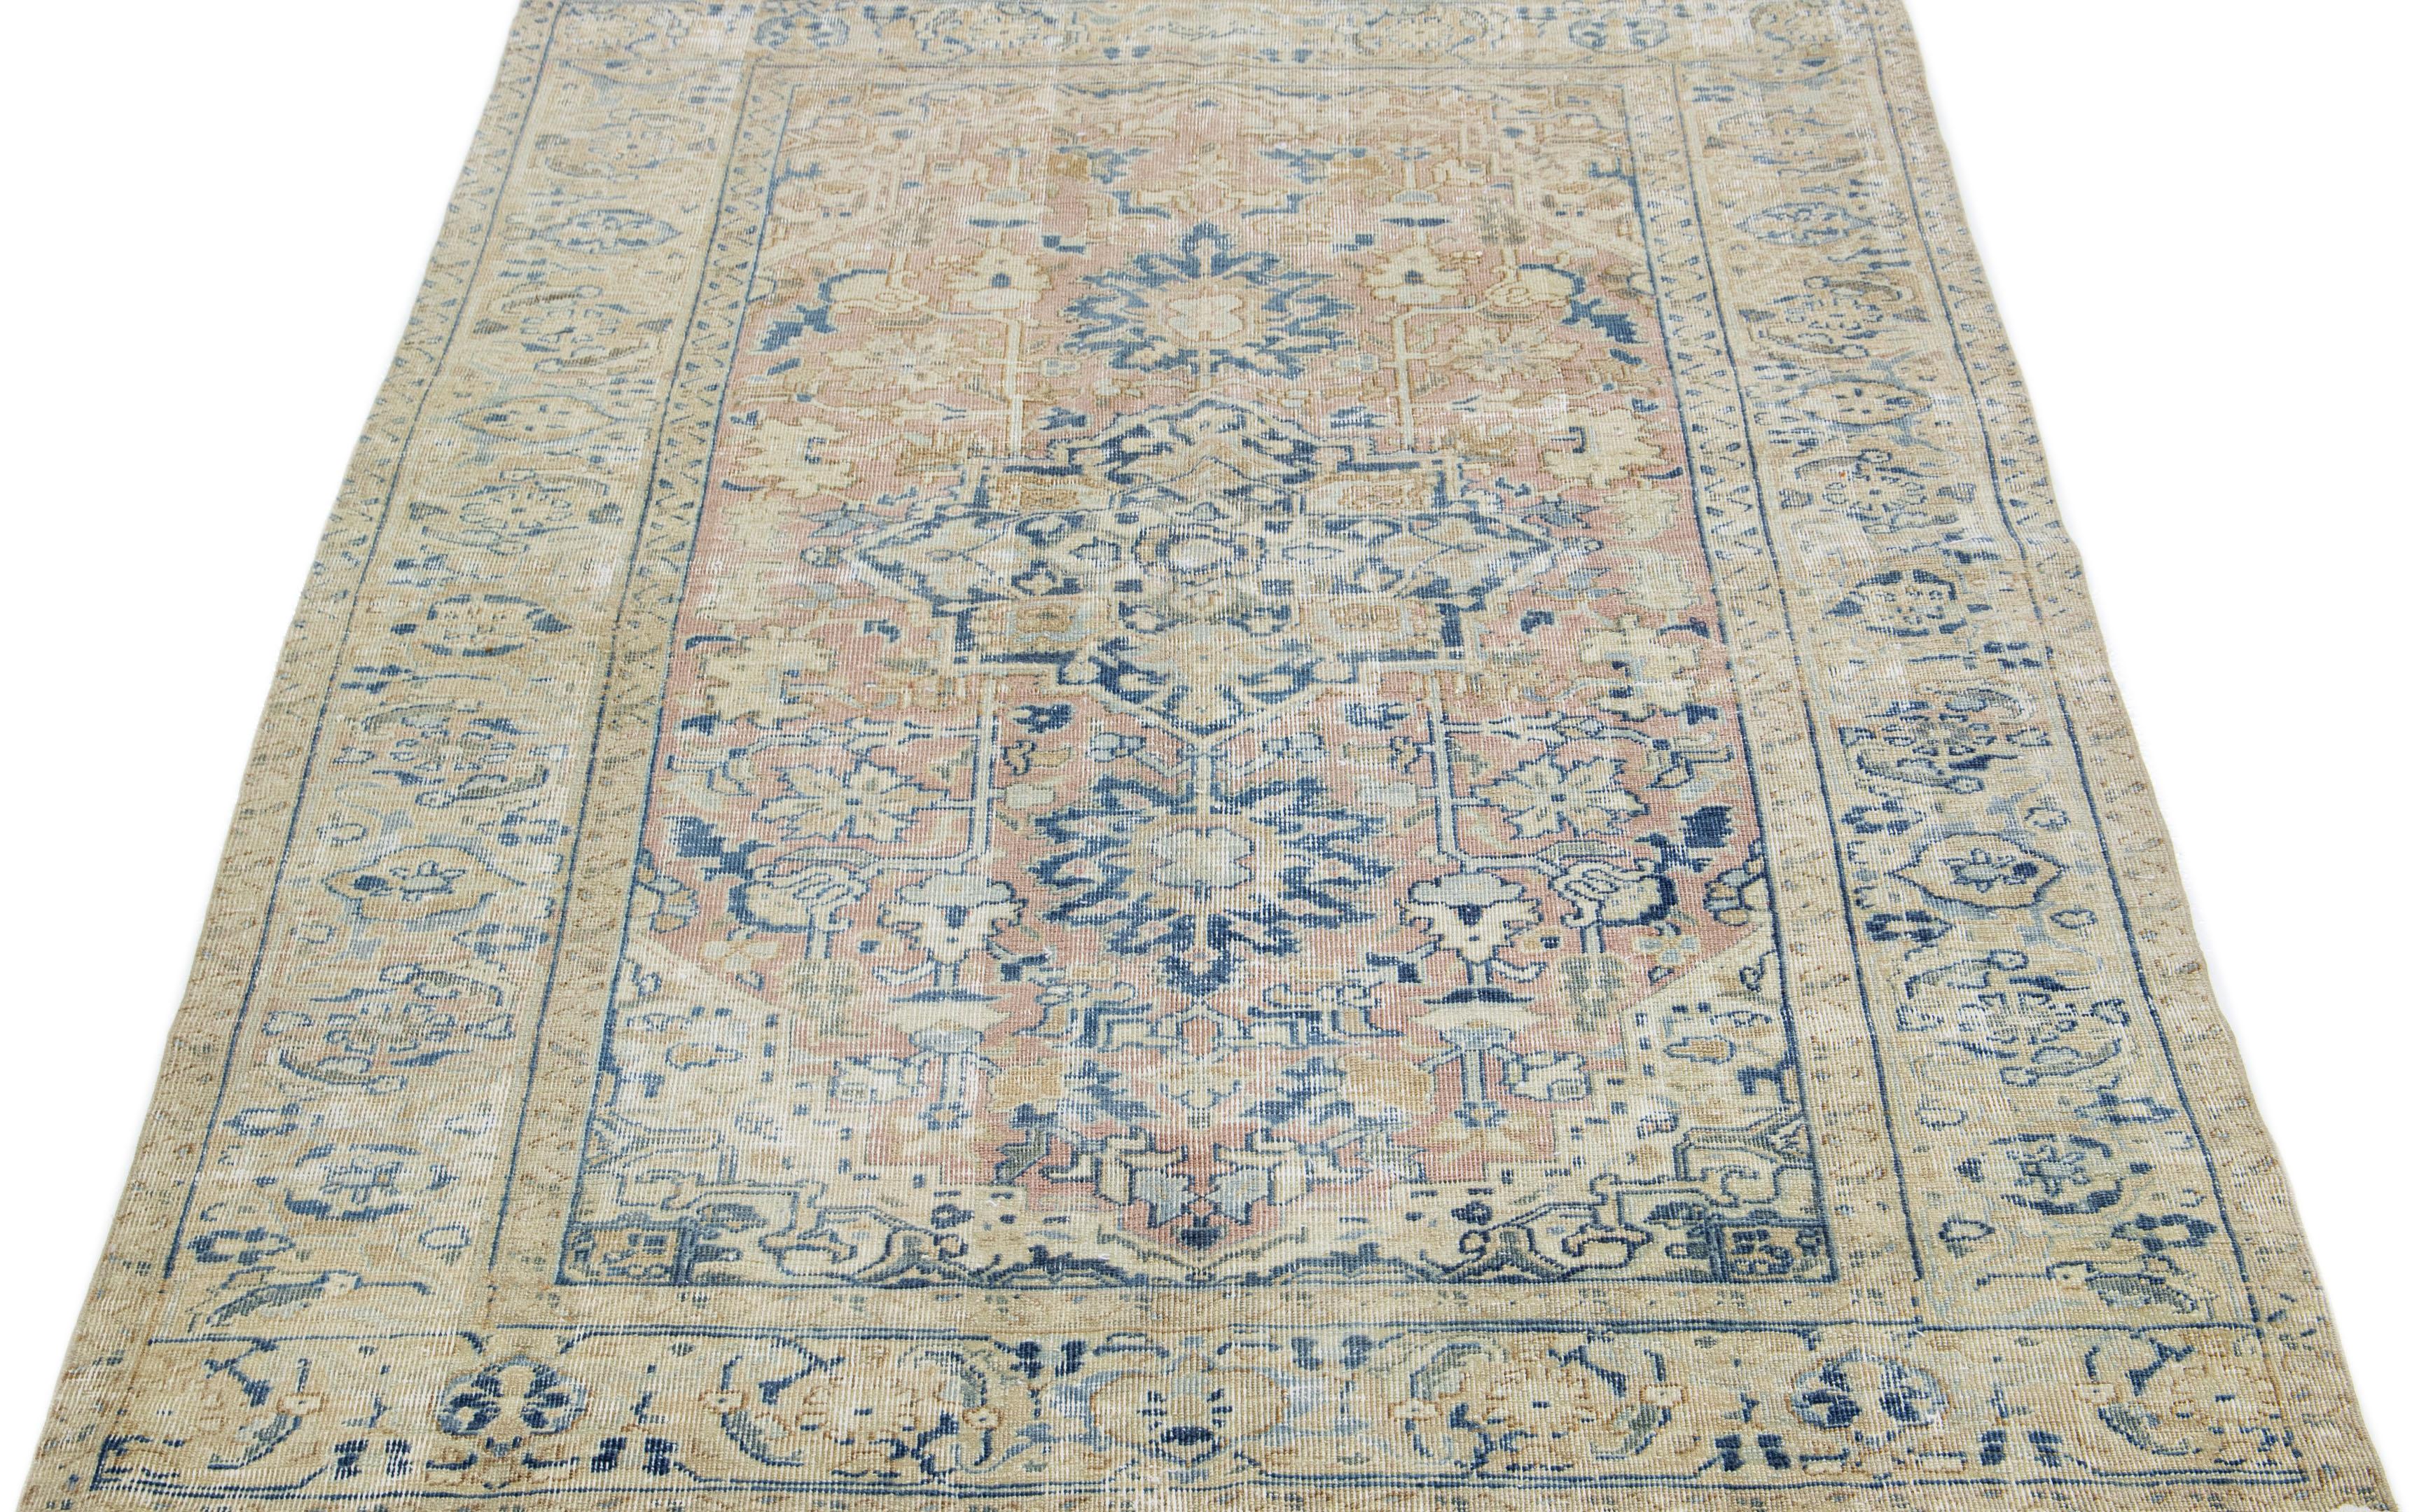 The Persian rug displays an exquisite all-encompassing design, featuring a floral medallion and geometric motif in shades of blue and beige, set against a peach-toned field.

This rug measures 5.9